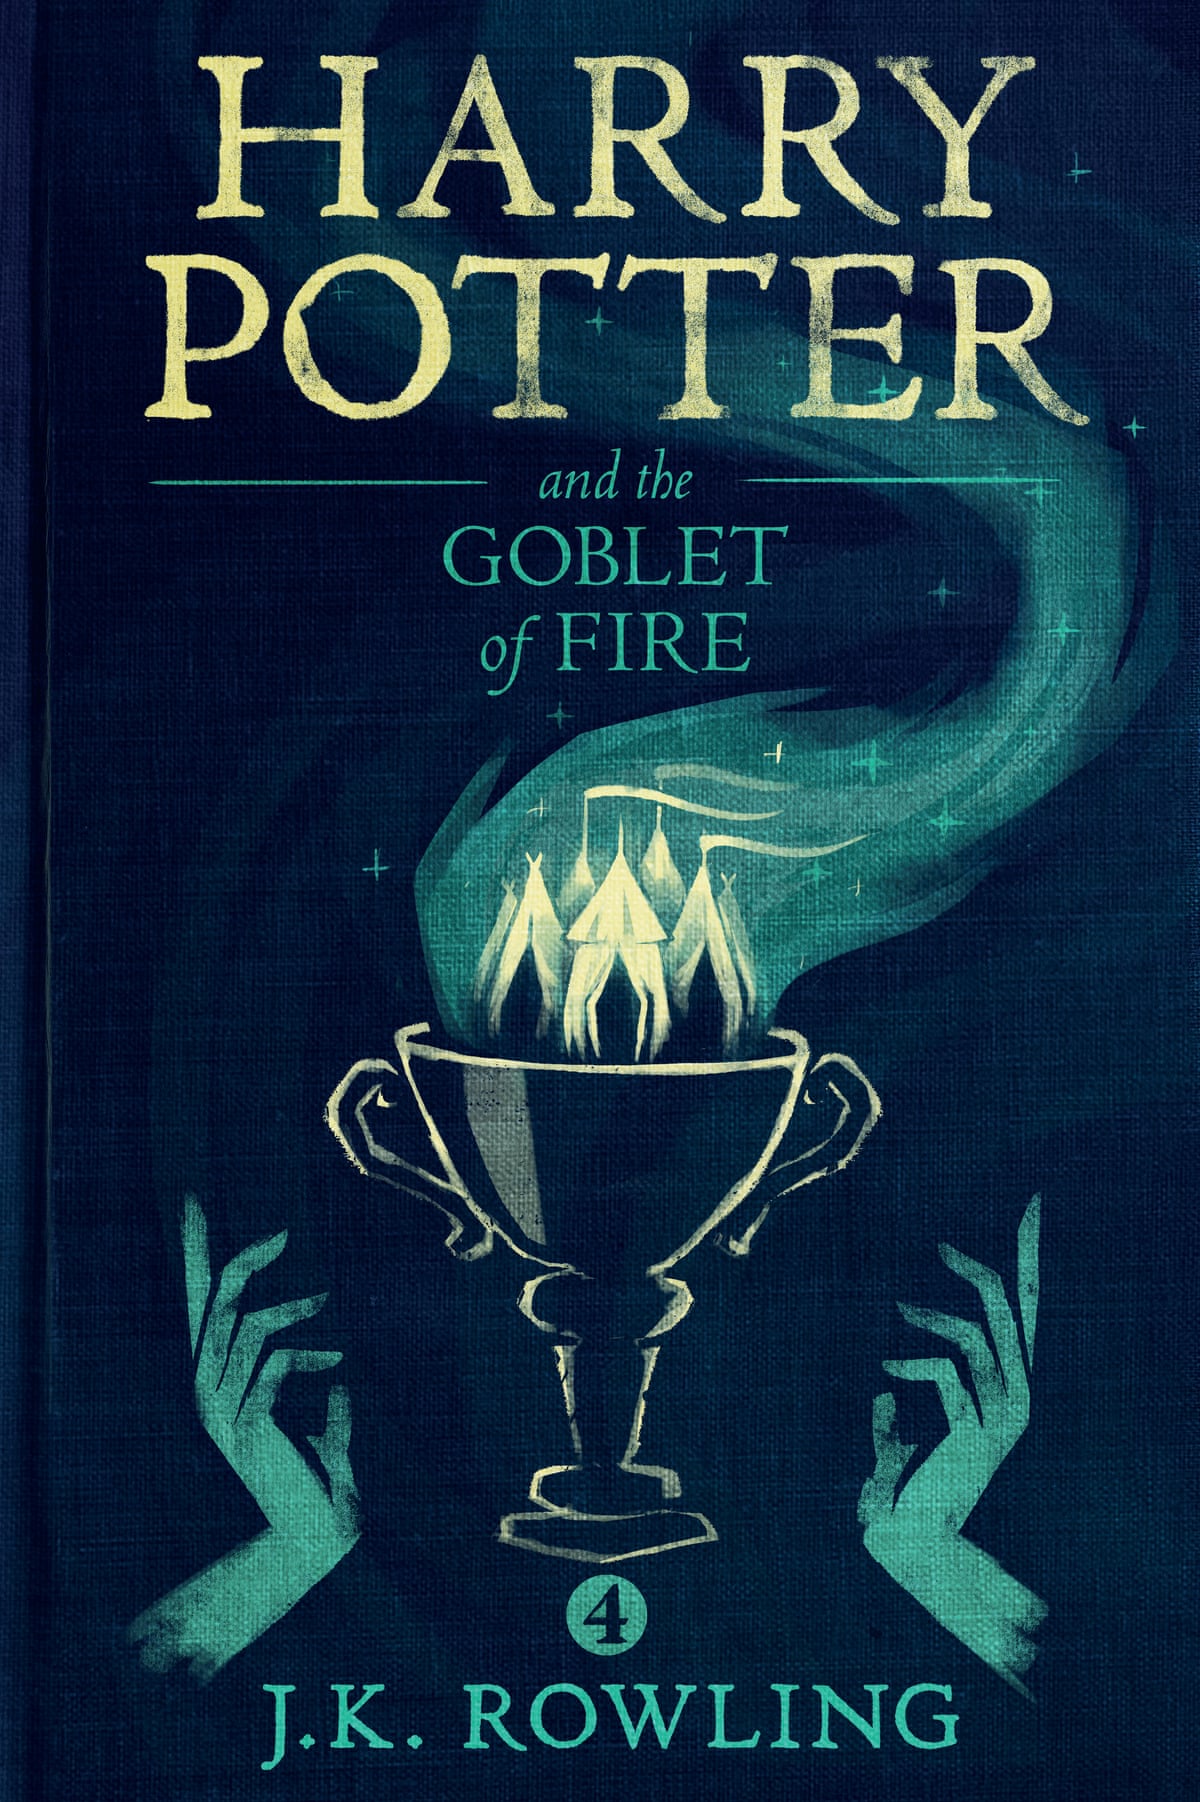 New Harry Potter ebook covers revealed! | Children's books | The Guardian